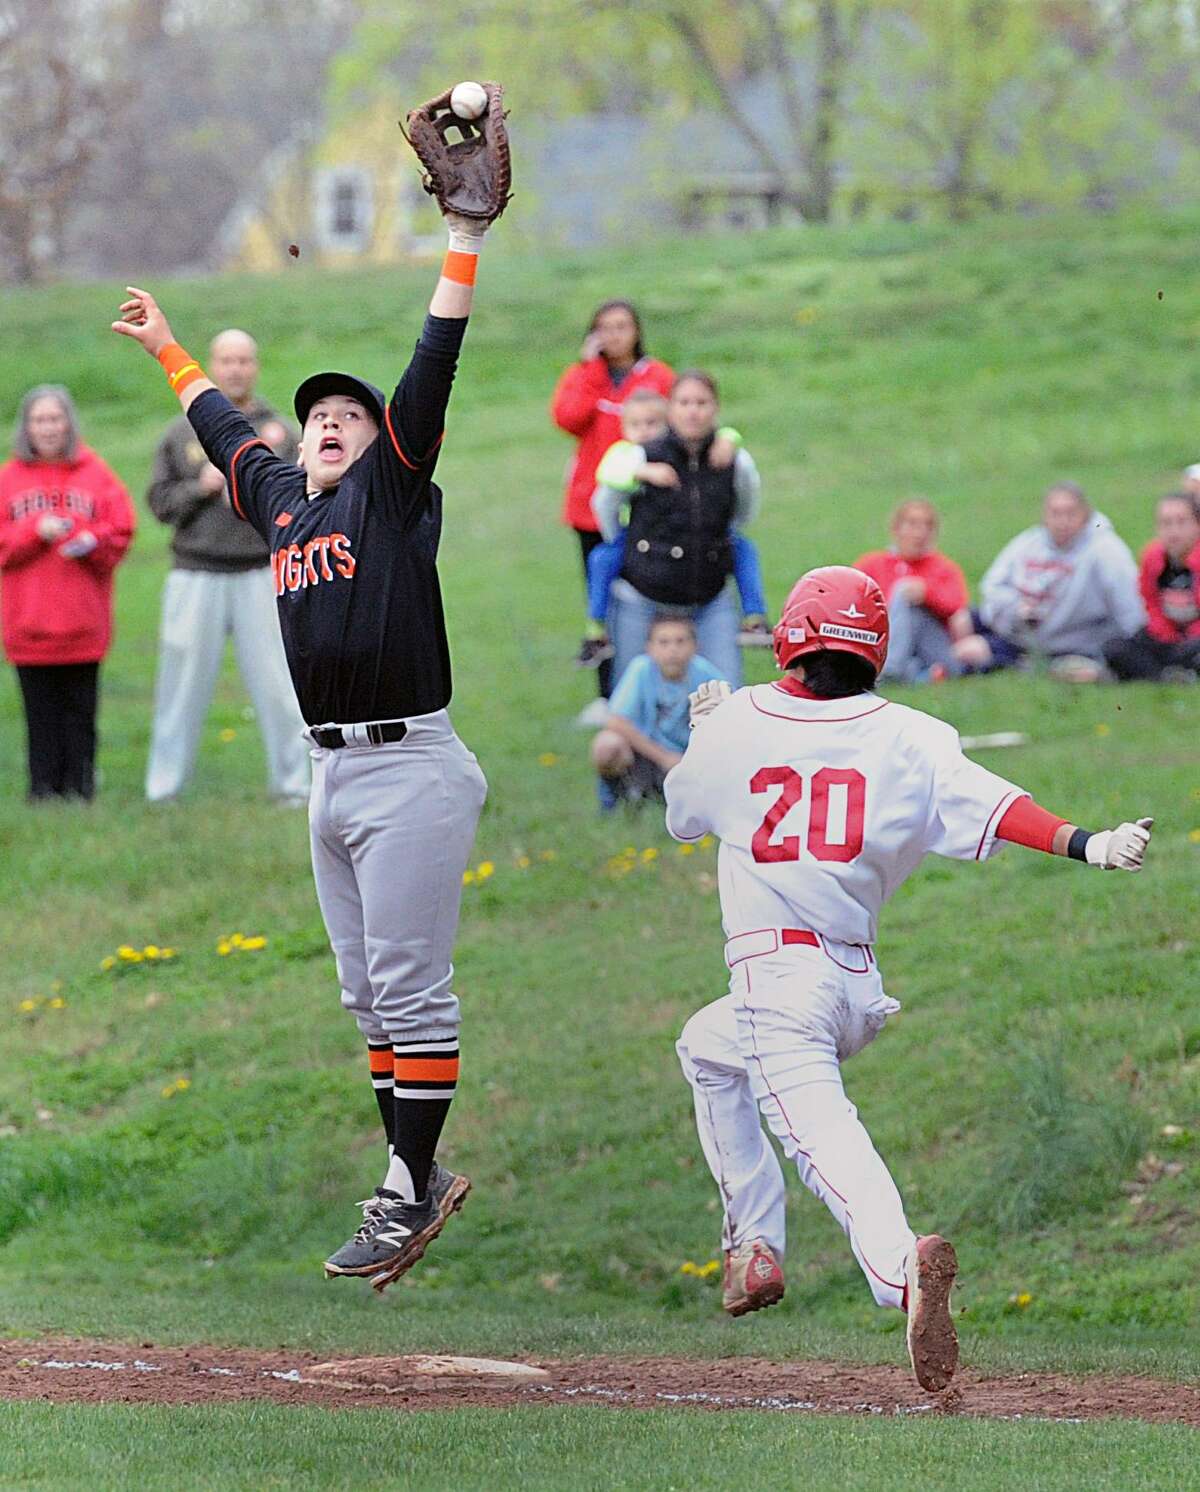 Greenwich’s Mark Sunoo beats out a bunt as Stamford first baseman Justin Wexler is pulled off the bag on a high throw in the second inning of the Cardinals’ 7-2 victory on Wednesday in Greenwich.